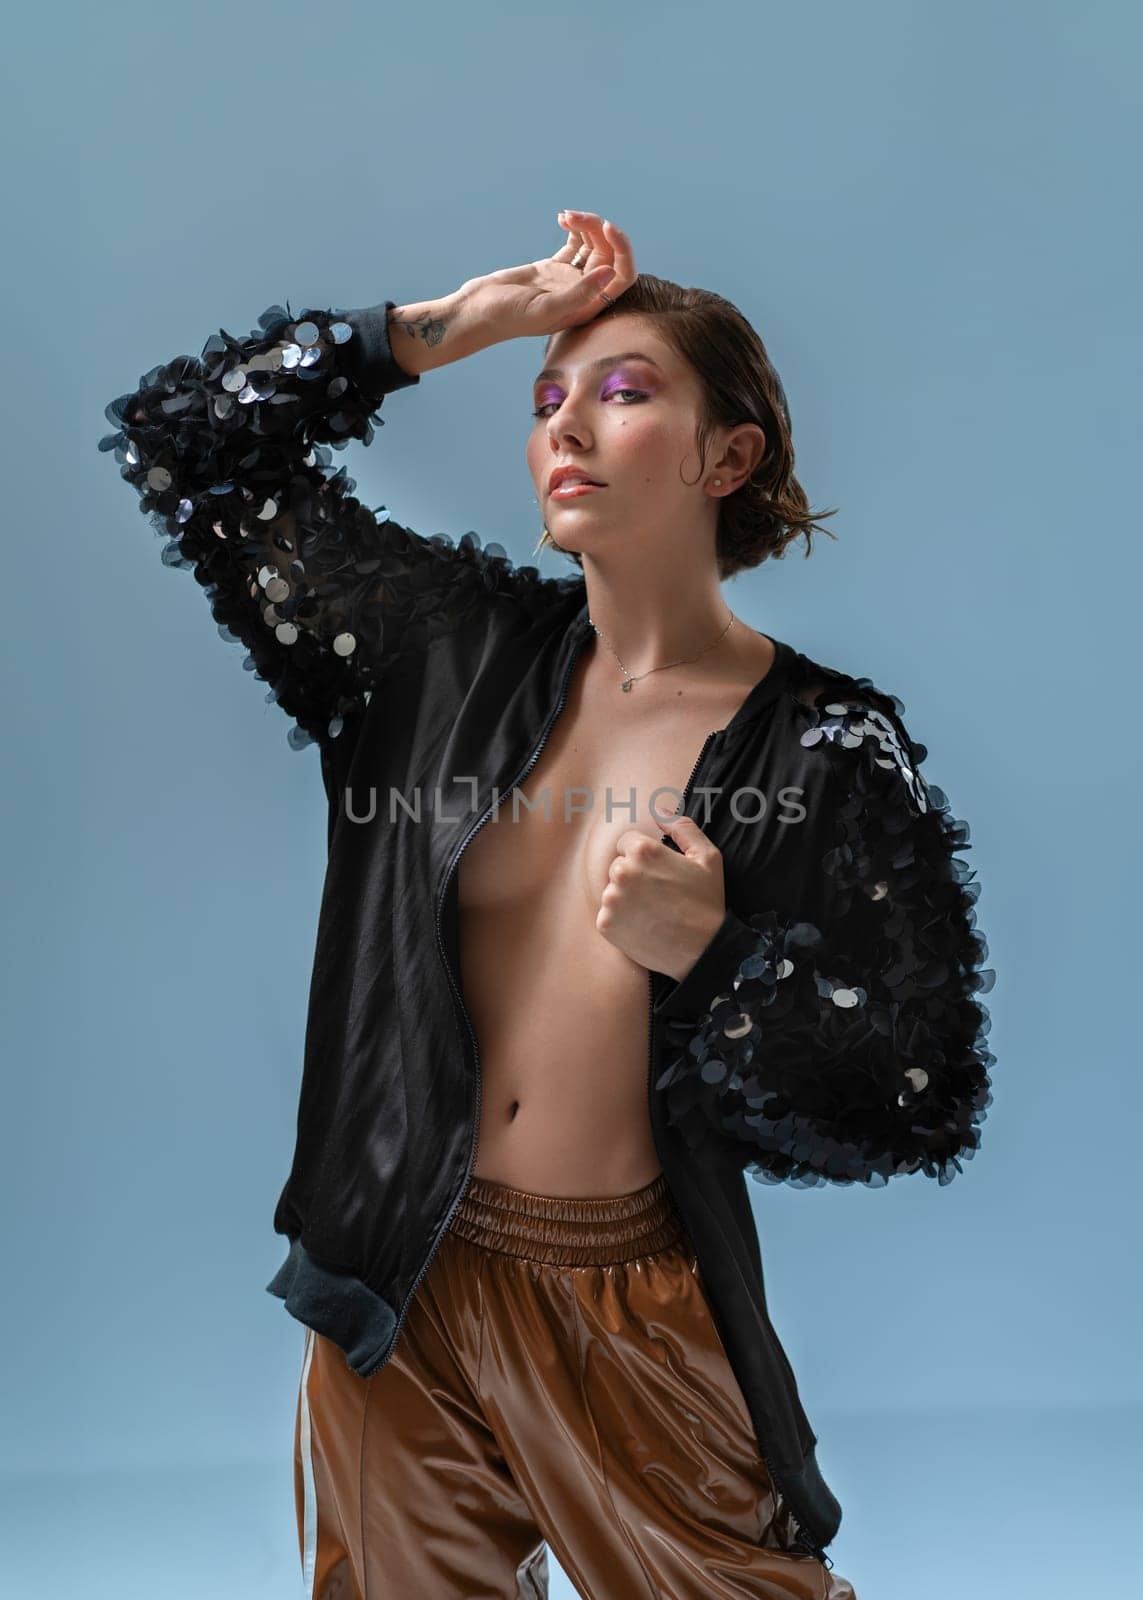 Portrait of sensual young female model with short hair in black fashionable jacket. Sexy woman with makeup in trendy outfit on naked body against blue background.